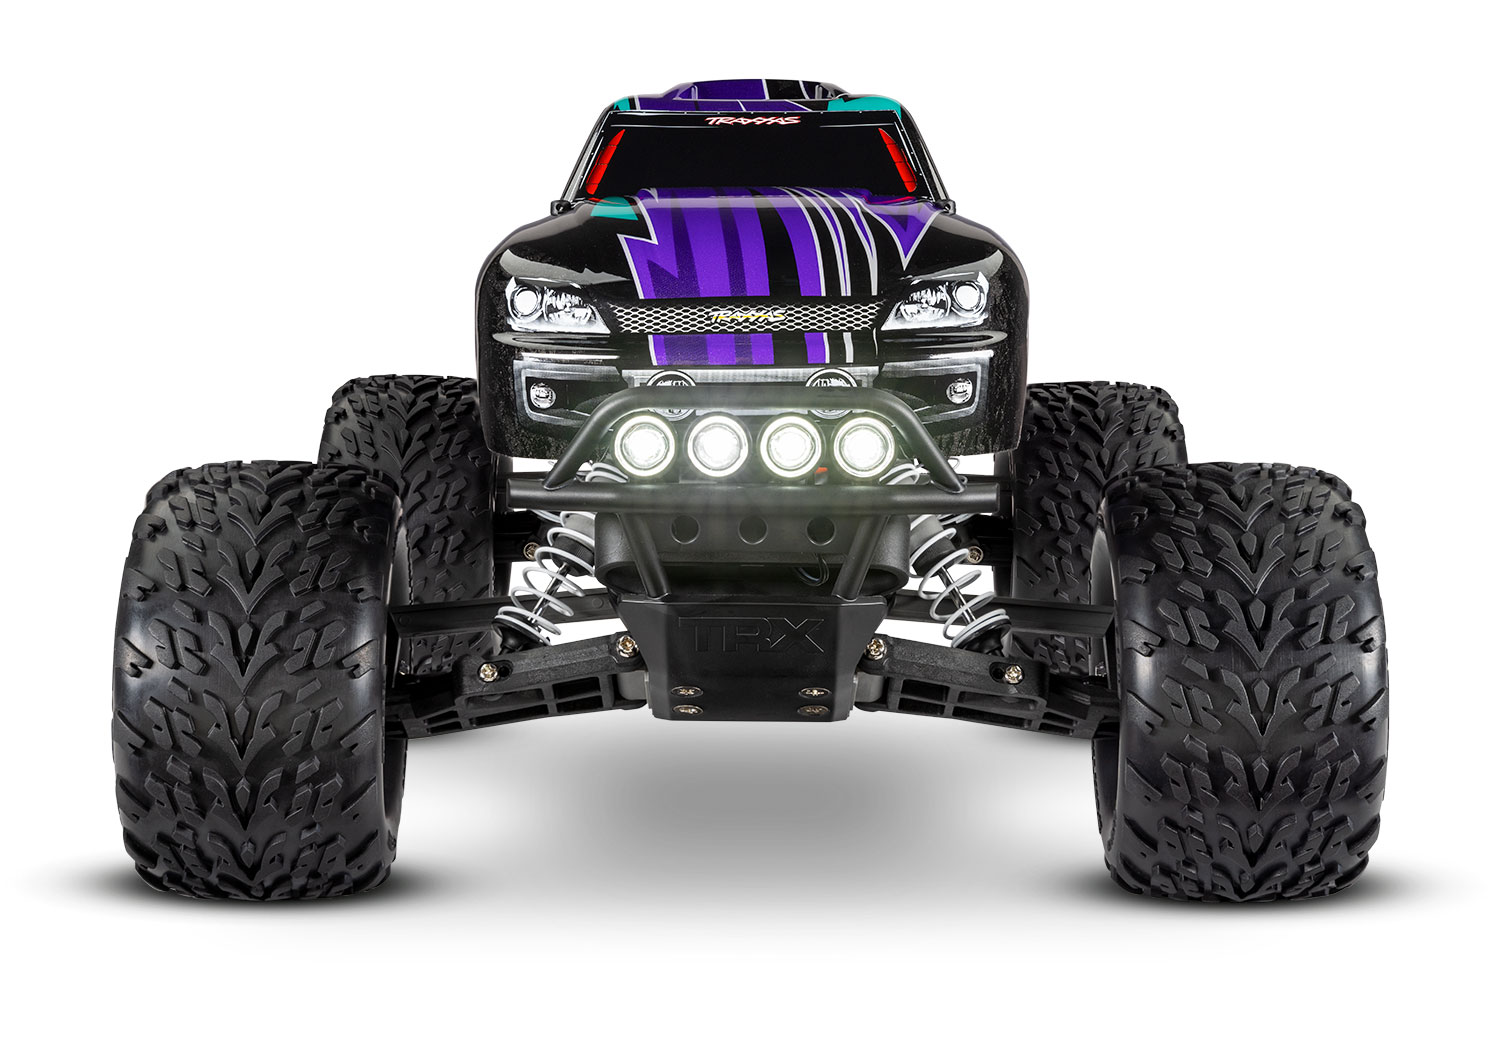 Traxxas Stampede XL5 2WD monster truck RTR 2.4Ghz met LED verlichting inclusief Power Pack - Paars